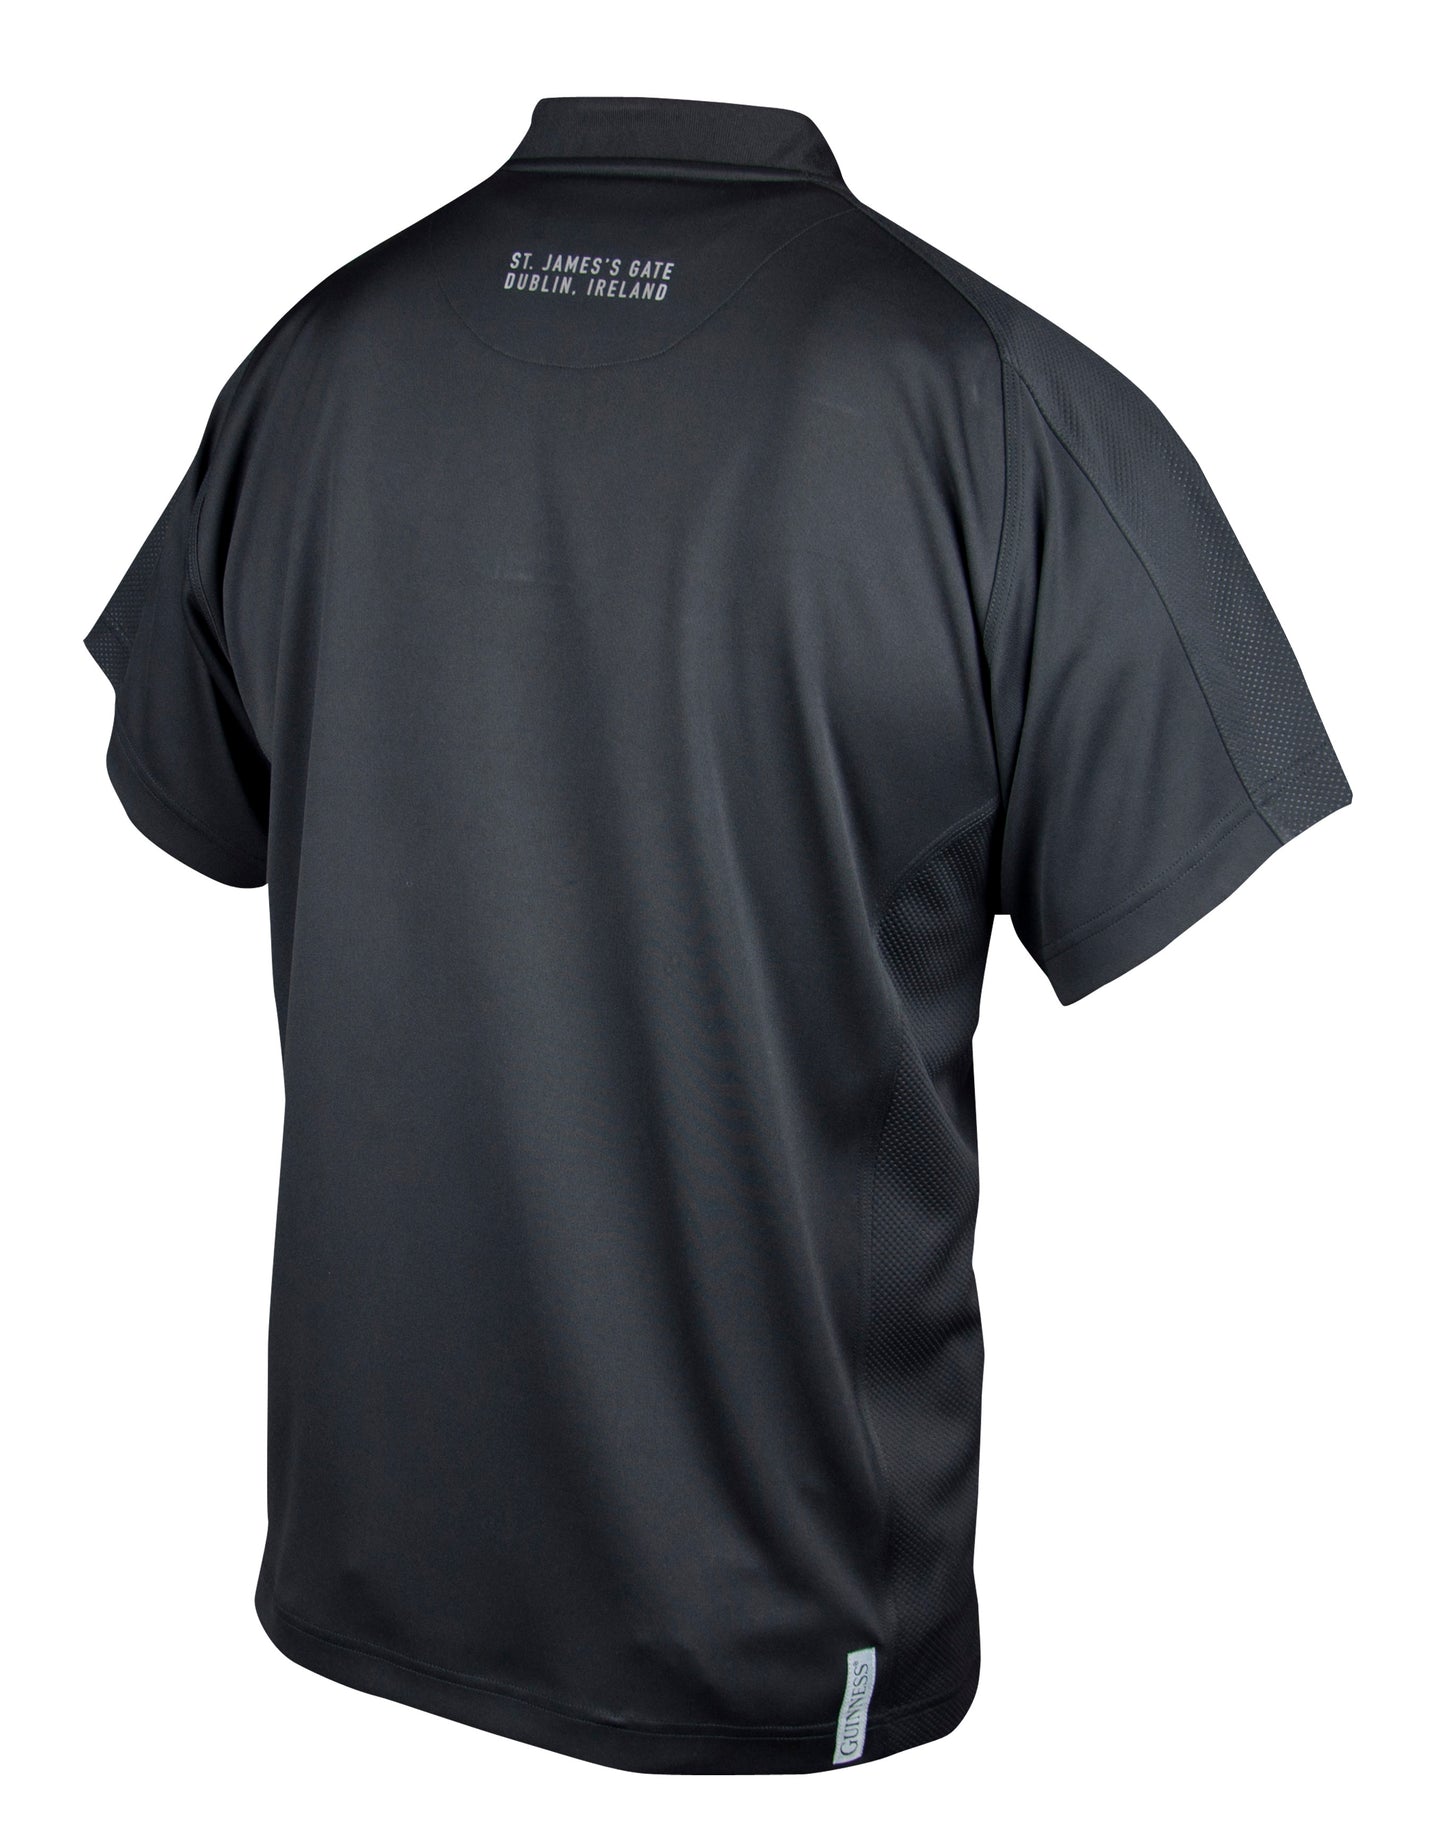 The back view of an All Black Rugby Jersey polo shirt with moisture-wicking jersey fabric.